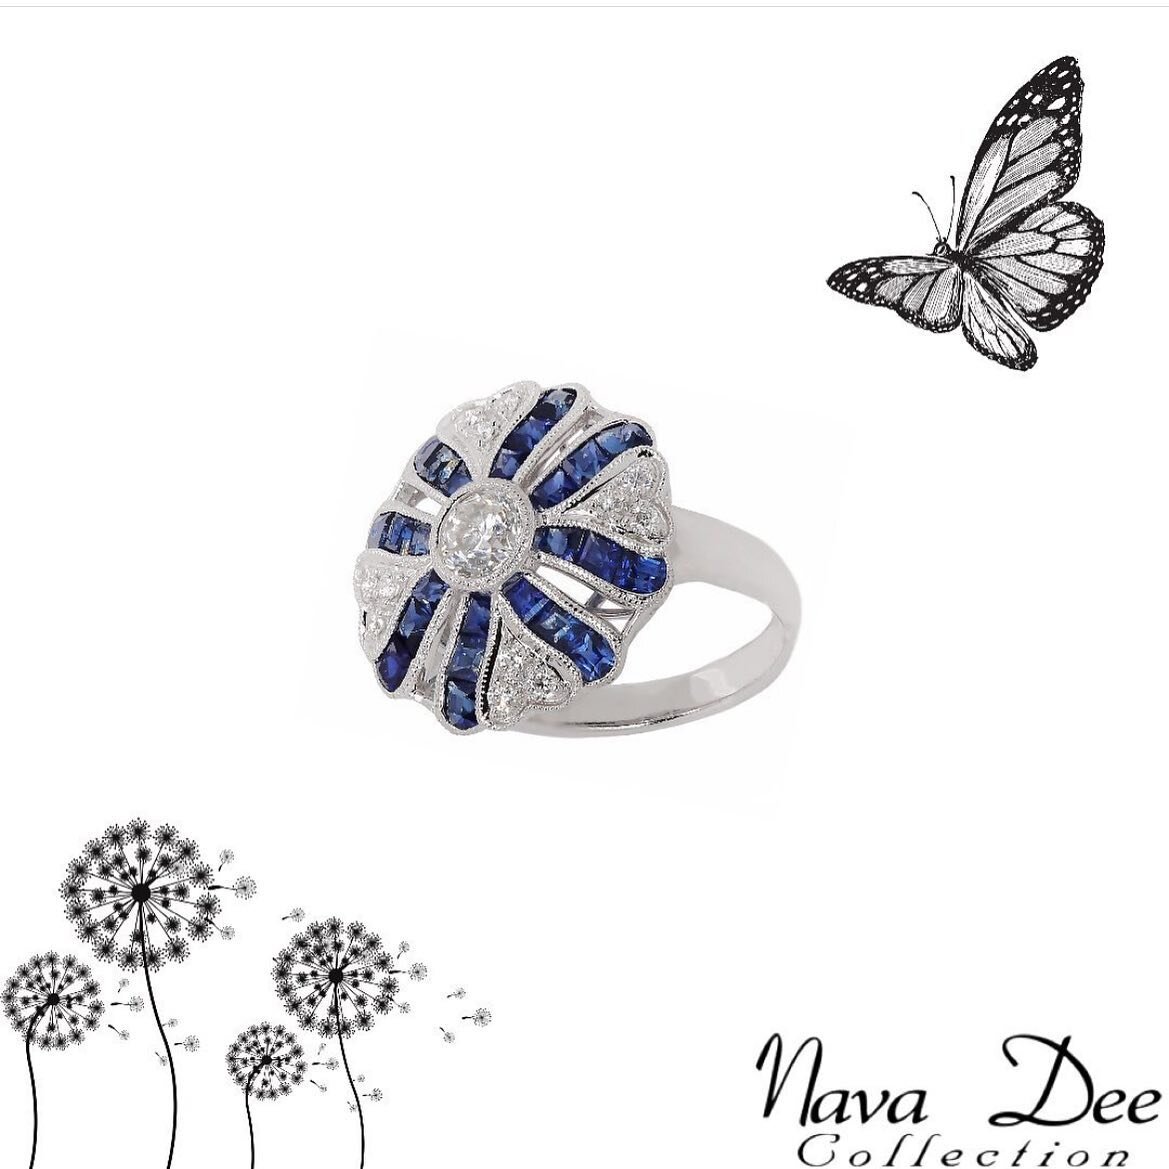 💎 Blue Beauty

✨Discover The Gold Collection at Nava Dee.

✨ 14k White Gold Ring With Diamonds and Sapphire Baguettes.
 
📍Want to see this beauty in person? DM for store locations.

#jewelry #accessories #gold #giftideas #silver #ring #jewelryaddic